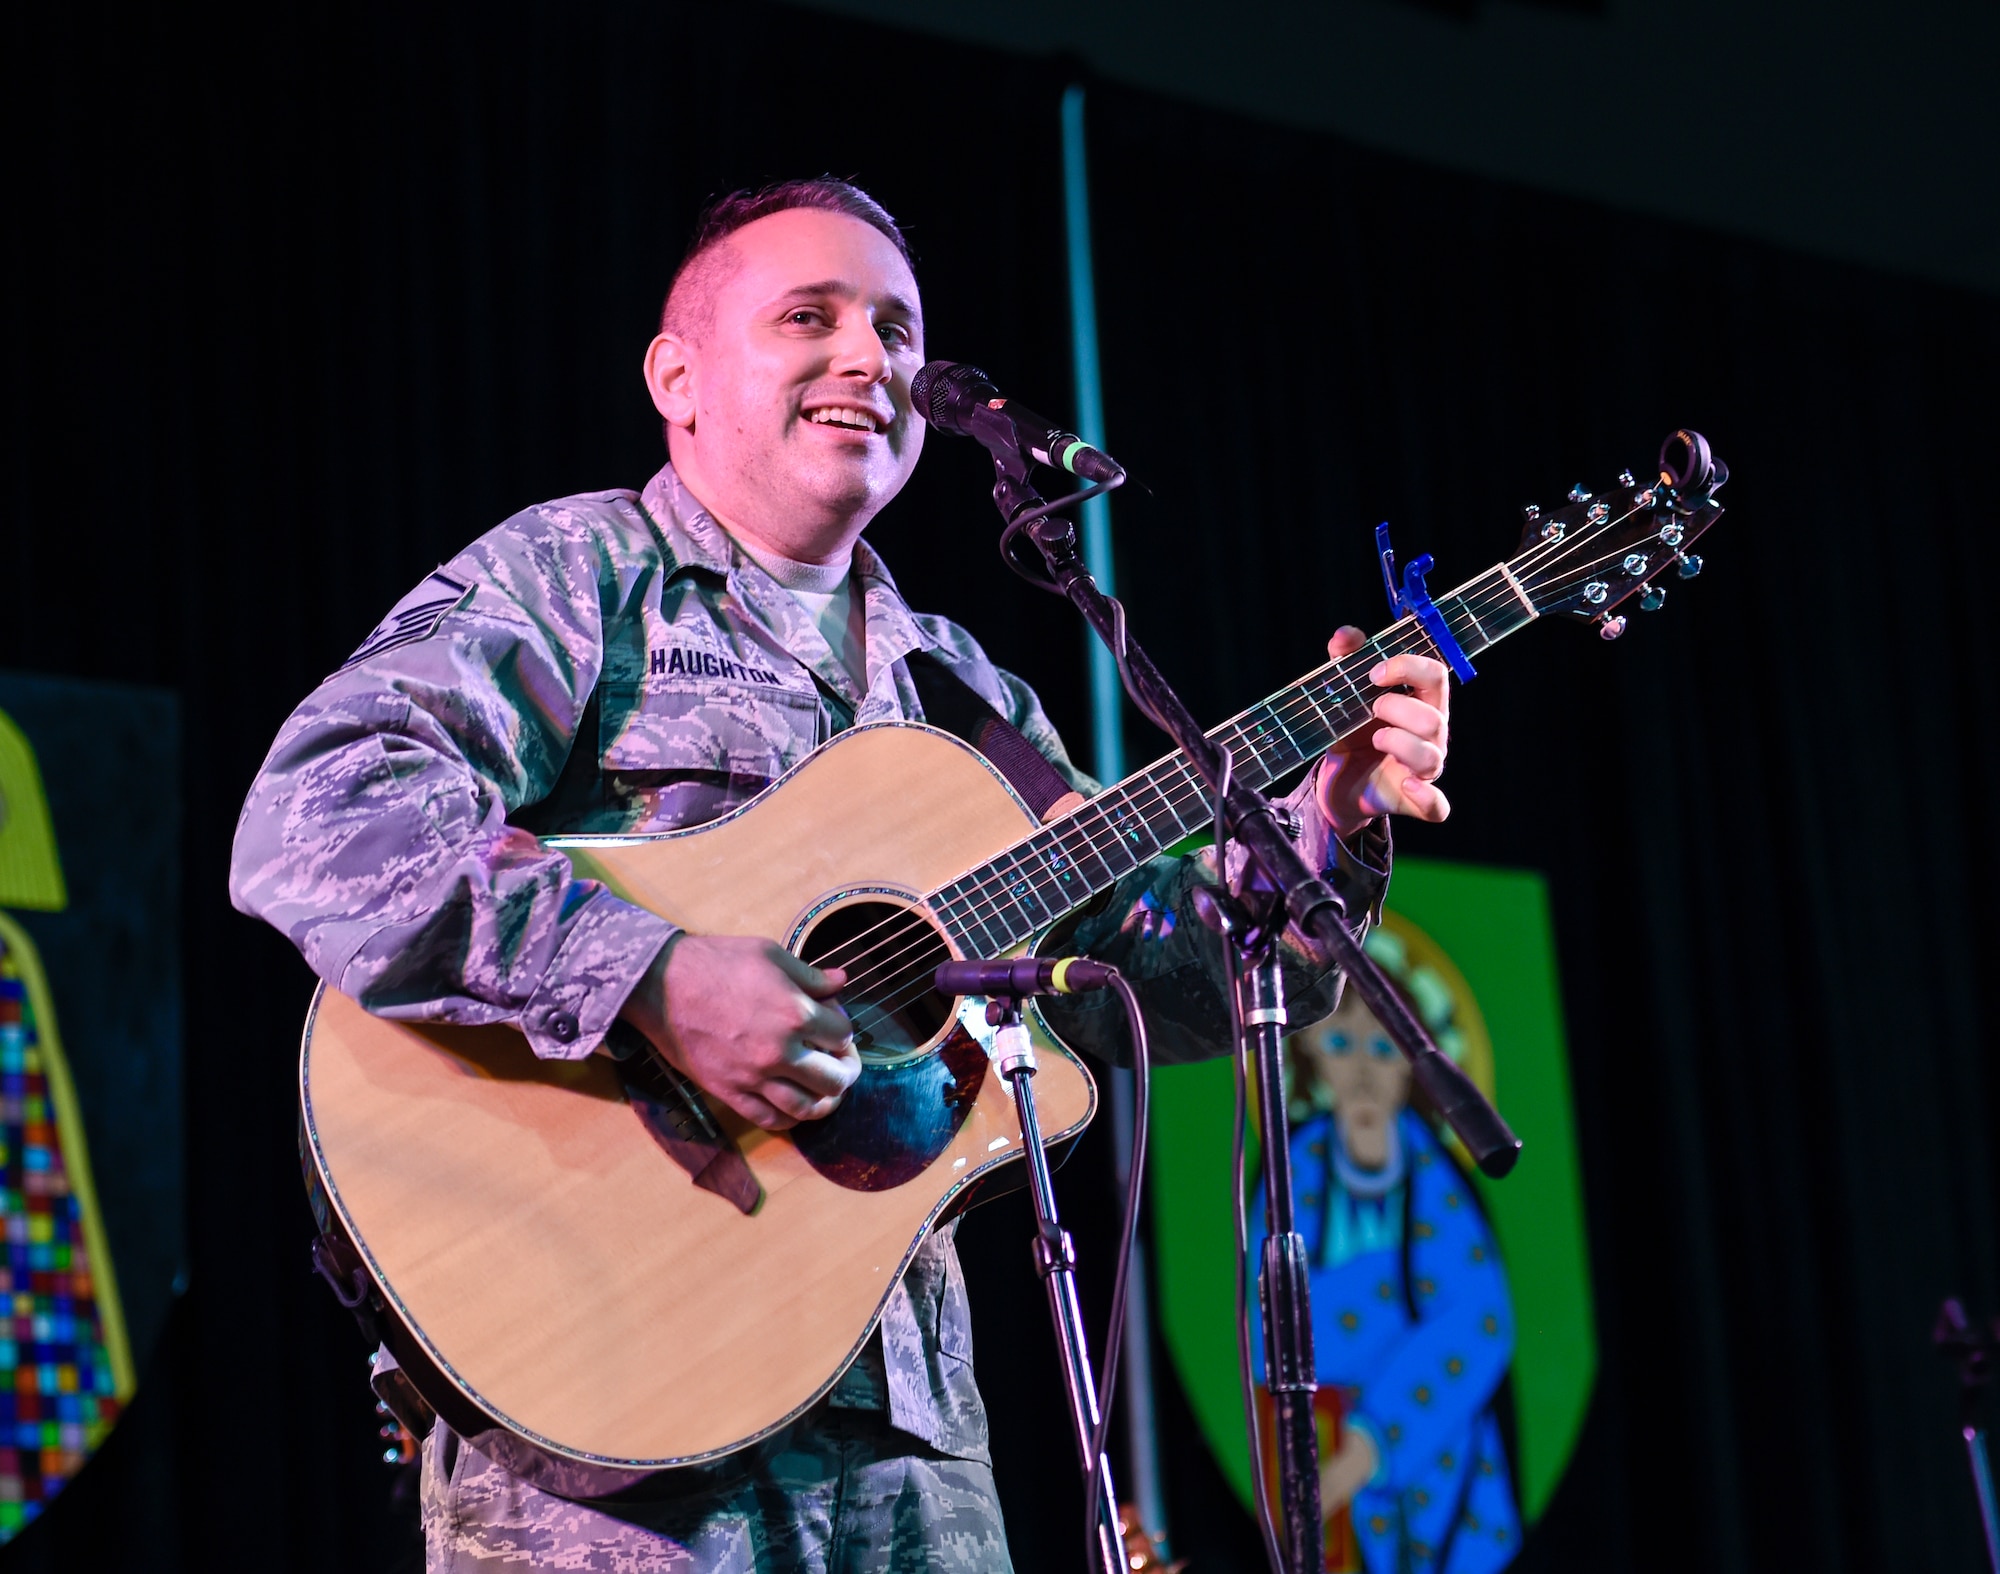 Master Sgt. Joseph Haughton, United States Air Force Band’s Celtic Aire vocalist and guitarist, plays an Irish song during a performance at the North Texas Irish Festival in Dallas, Texas, March 6, 2016. The band is the premier Celtic and folk ensemble of the U.S. Air Force Band. (U.S. Air Force photo by Senior Airman Ryan J. Sonnier/RELEASED)